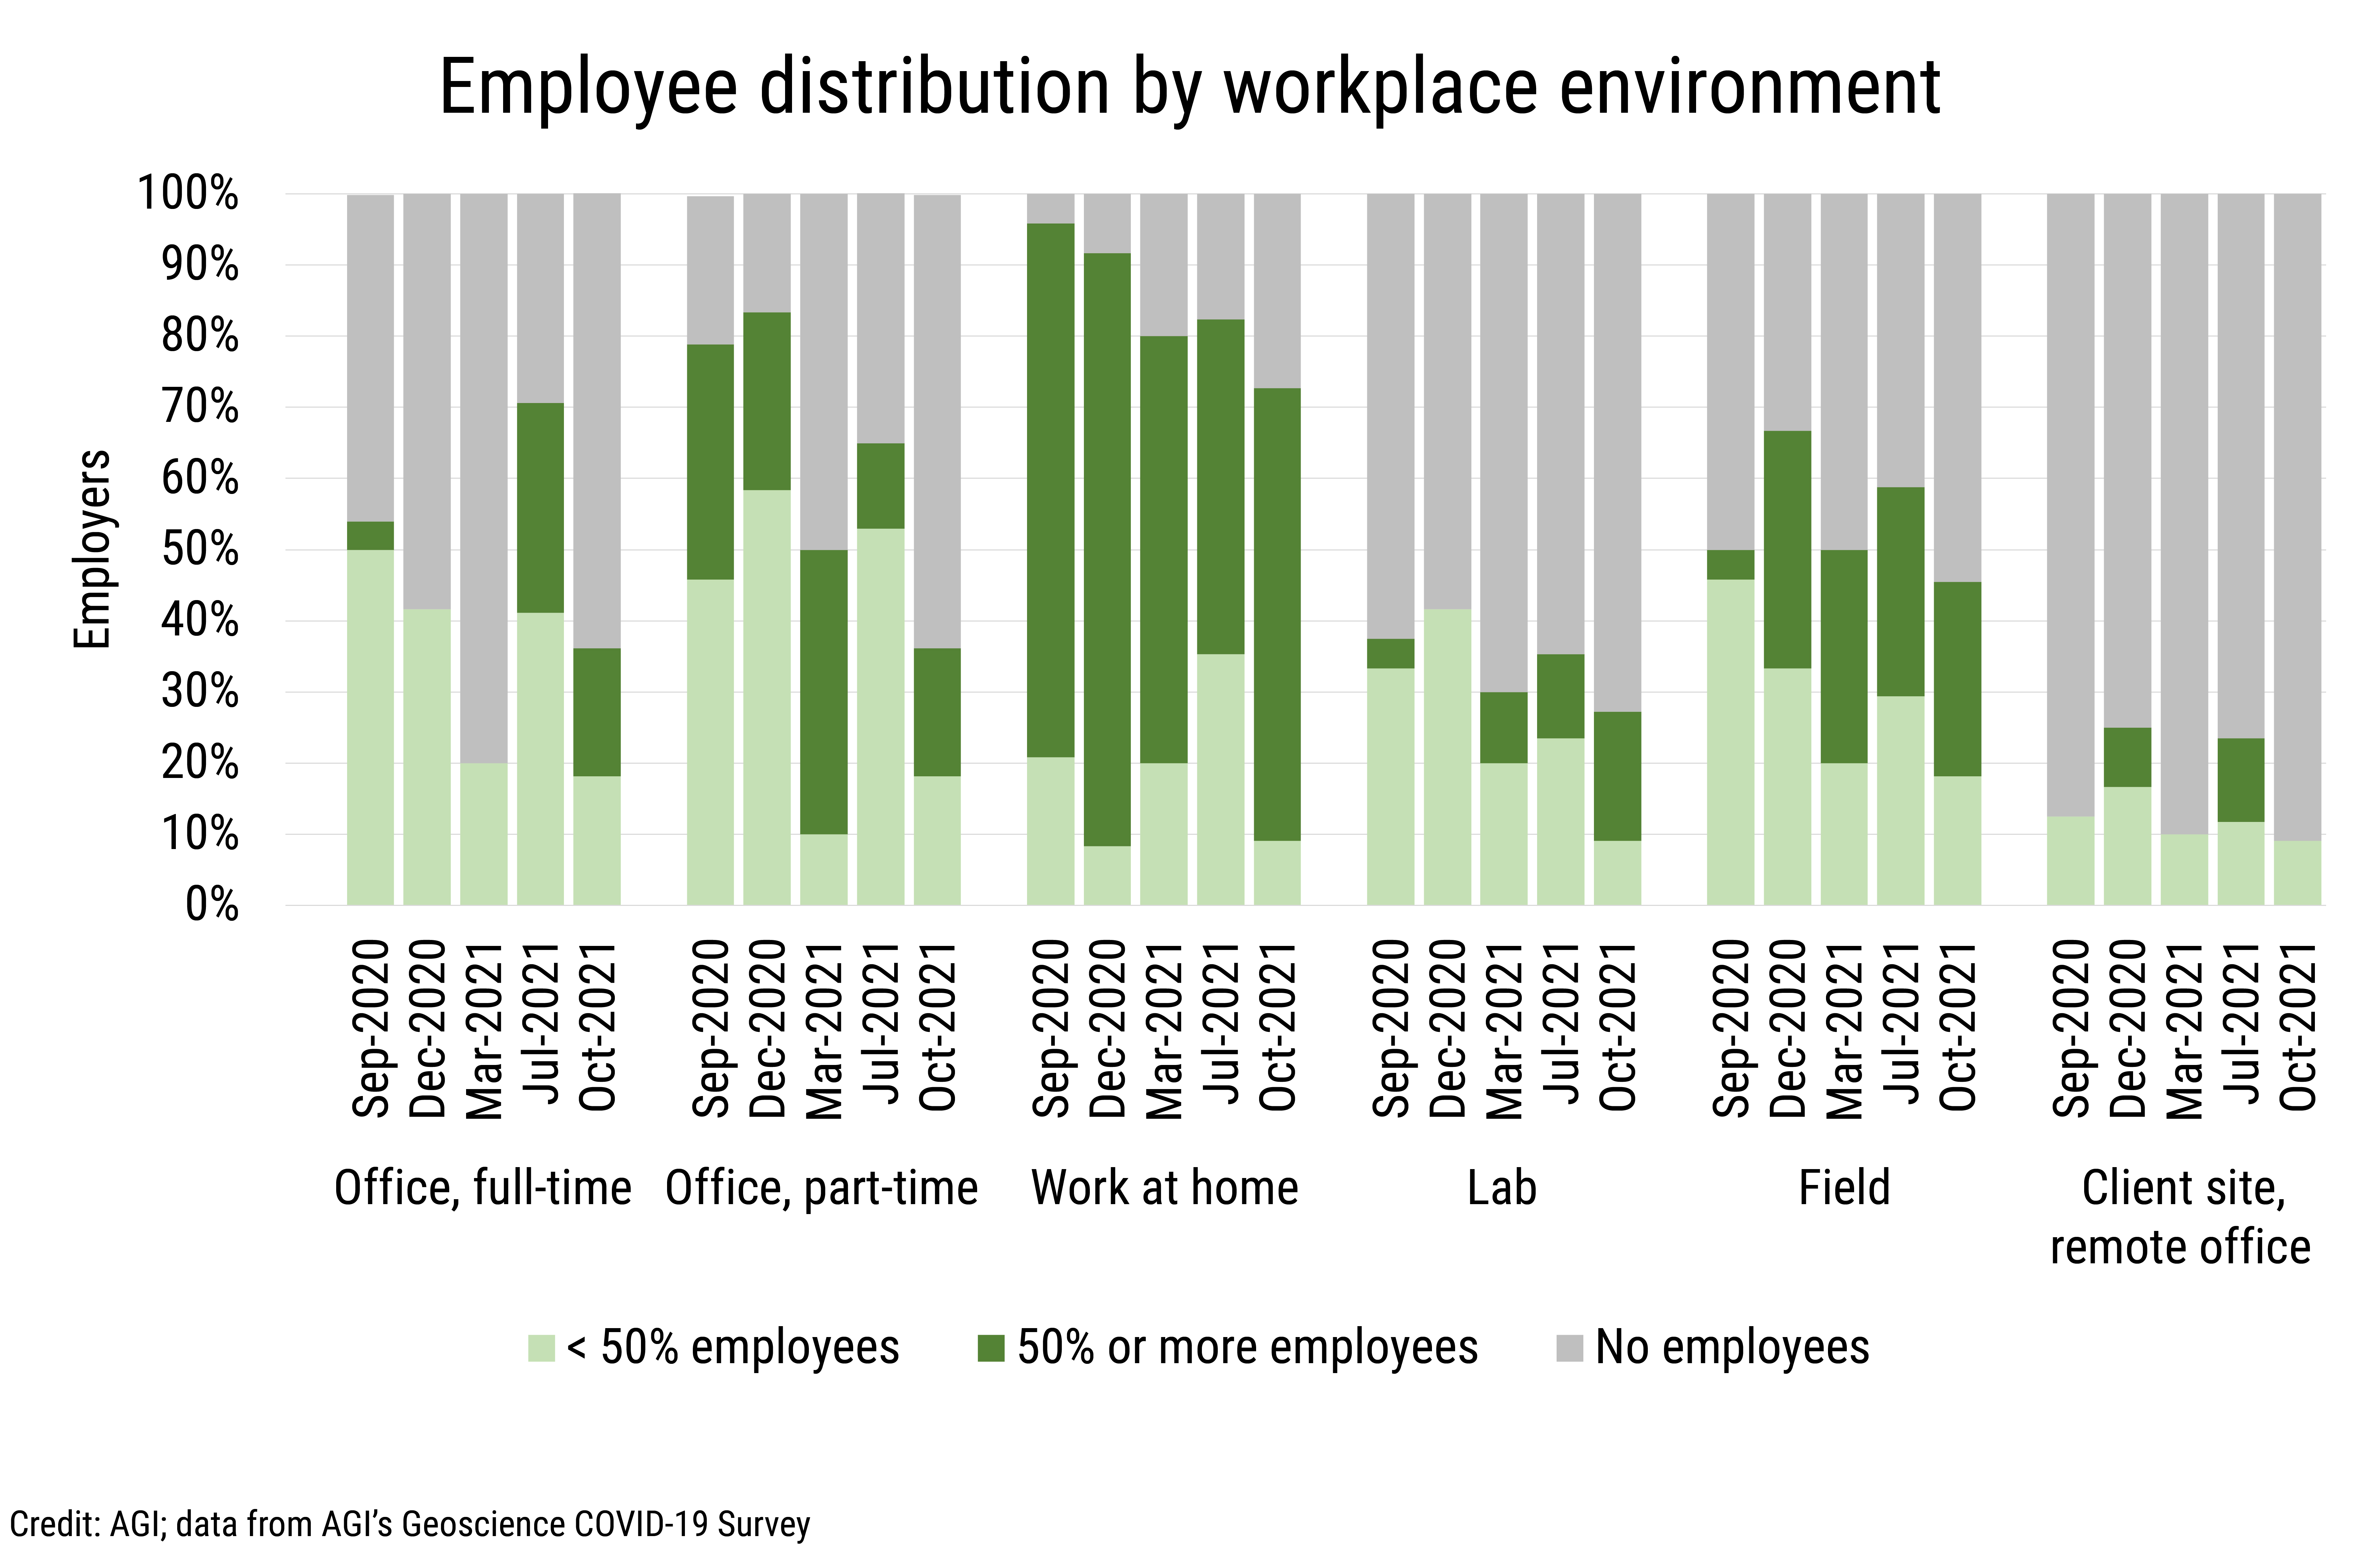 DB_2022-003 chart 08: Employee distribution by workplace environment (Credit: AGI; data from AGI's Geoscience COVID-19 Survey)